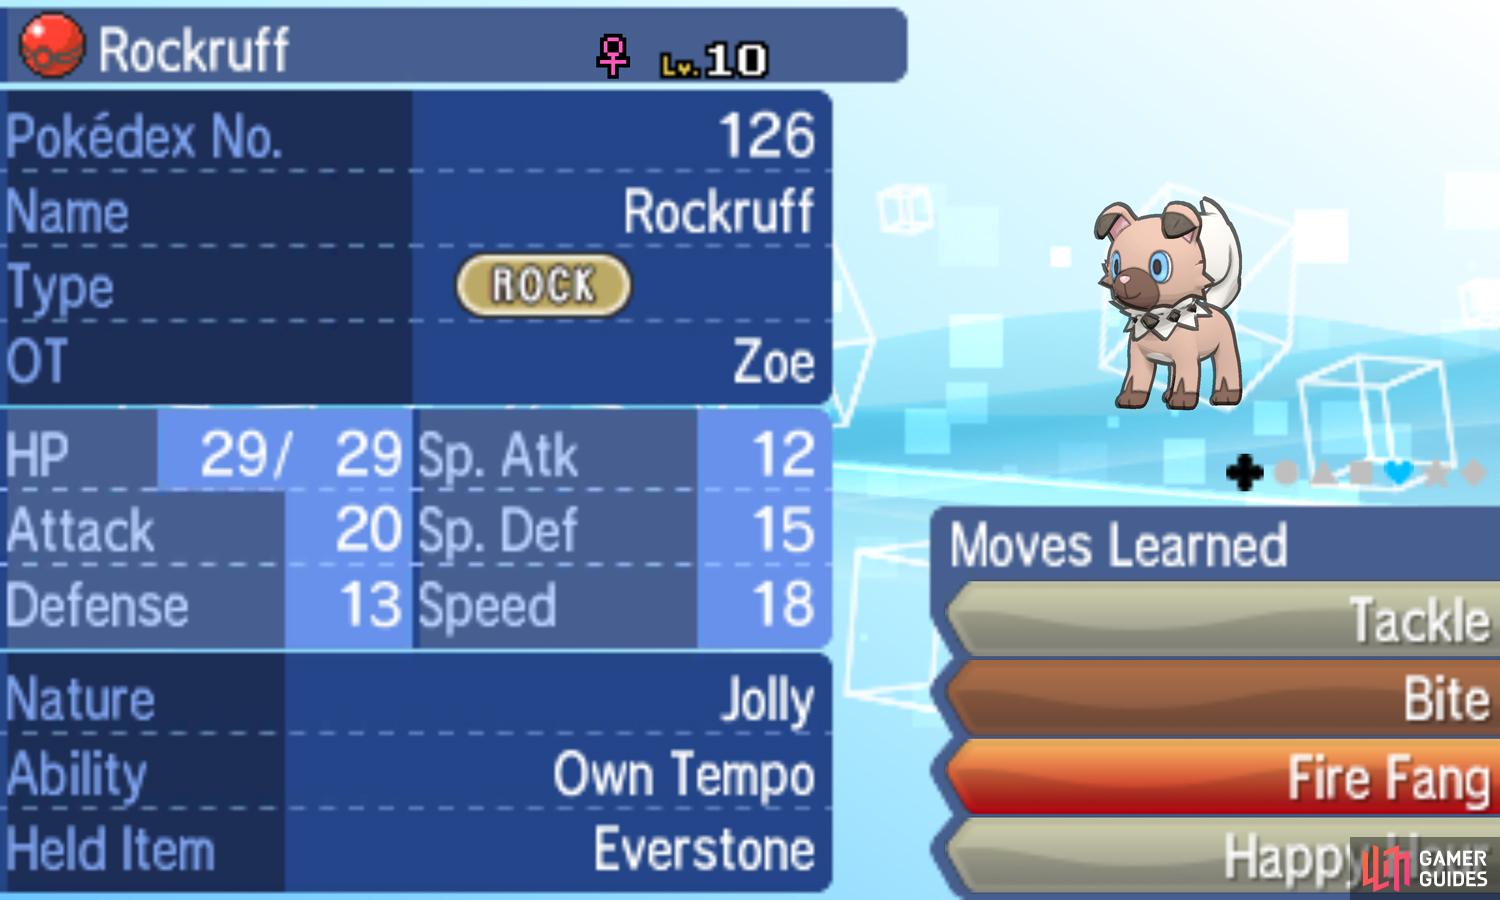 By breeding the special Rockruff, you can share out the love!